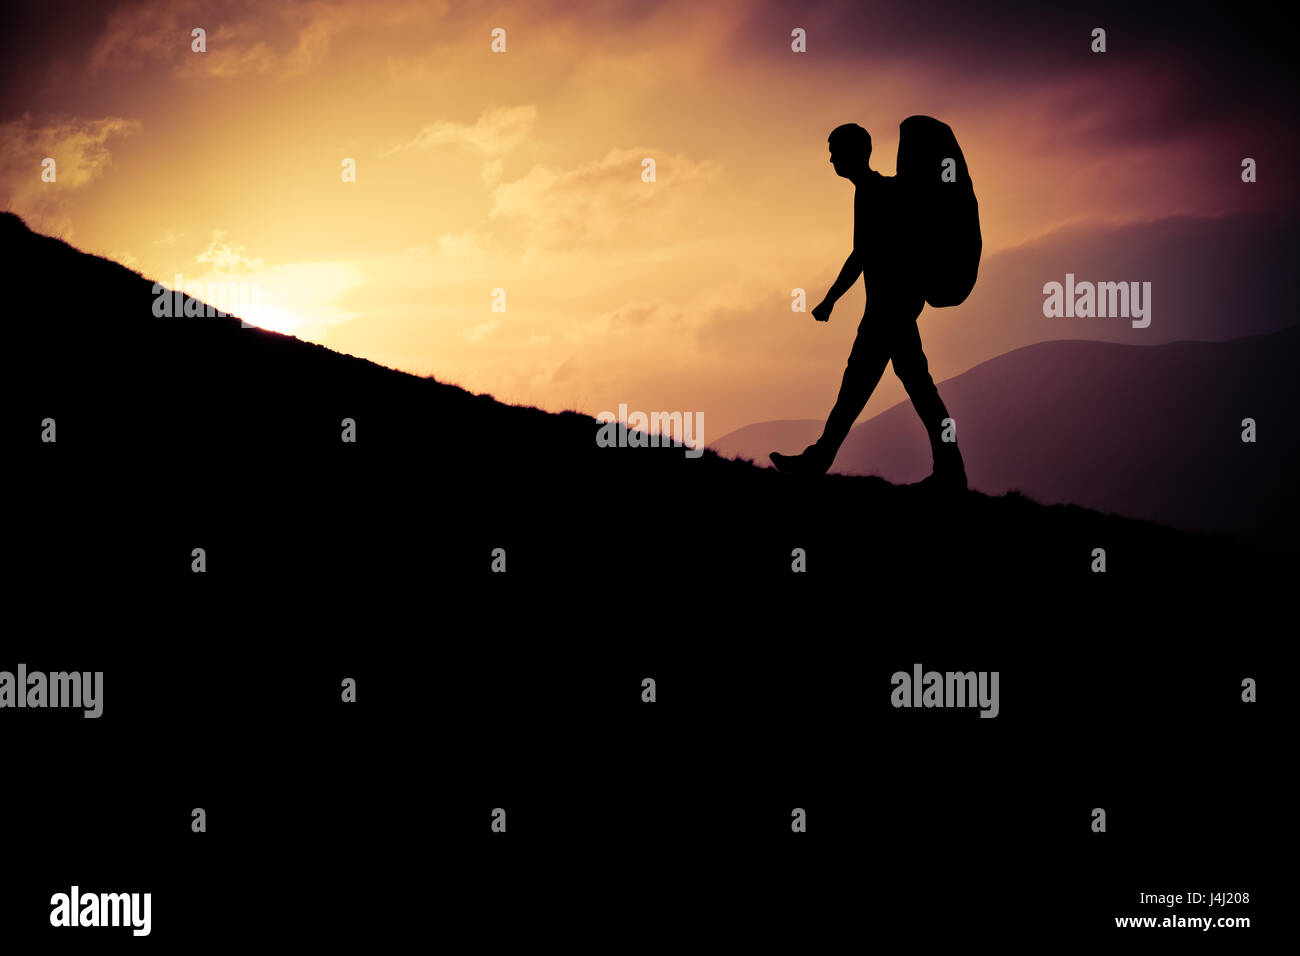 Retro Styled Design Of A Silhouetted Young Man Hiking Up A Steep Hill At Sunset Stock Photo